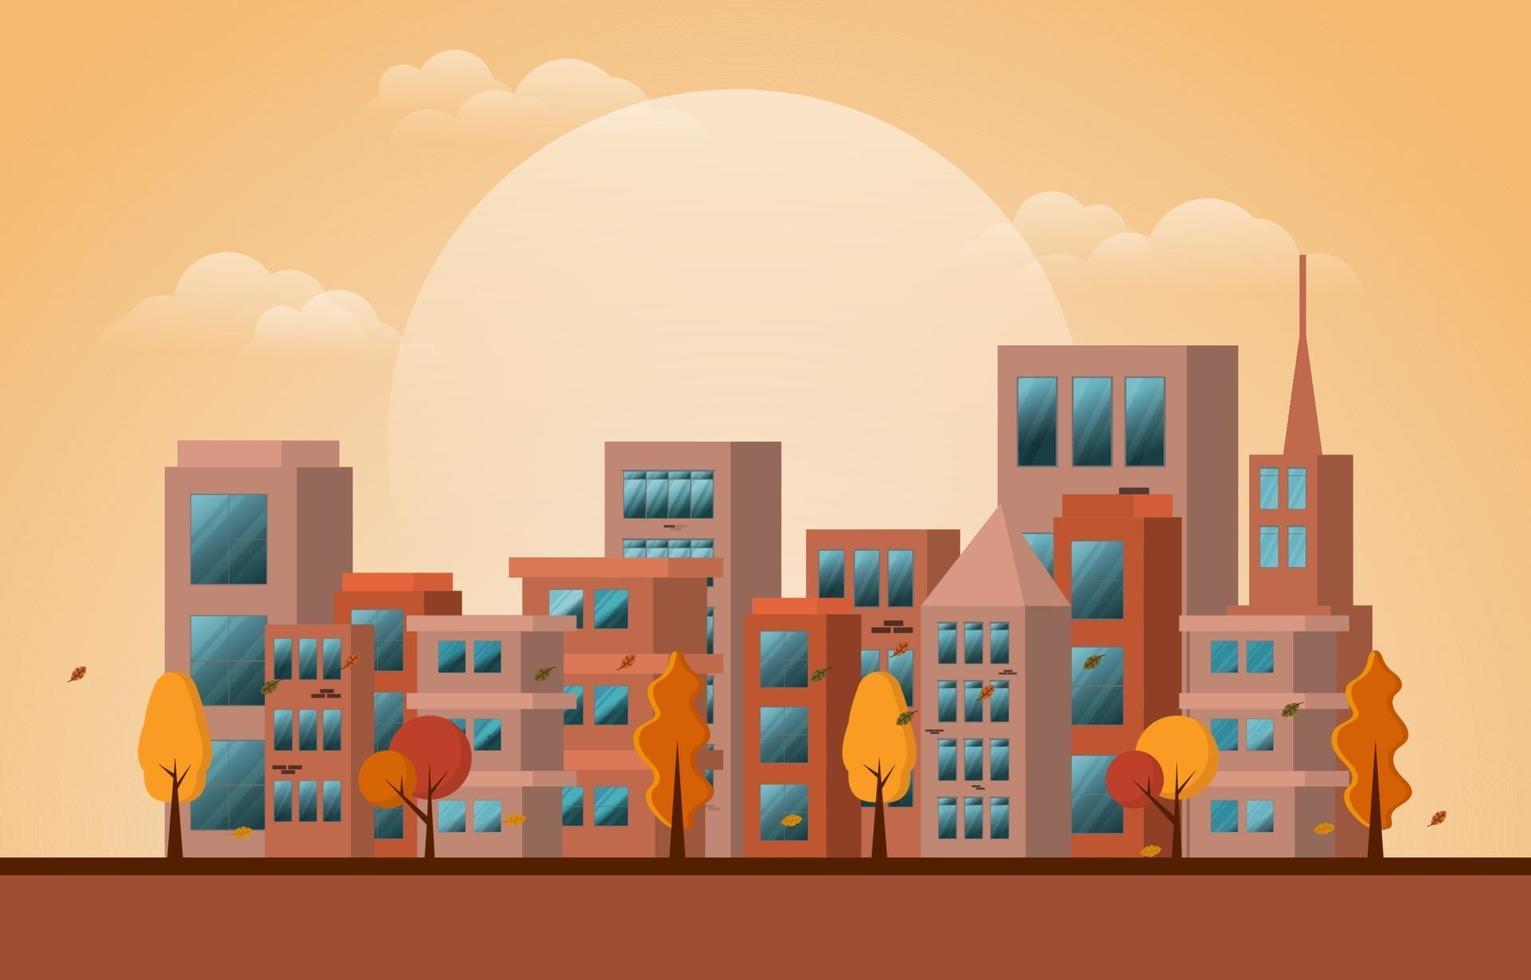 Afternoon Autumn Fall Season City Building Cityscape View Flat Design vector